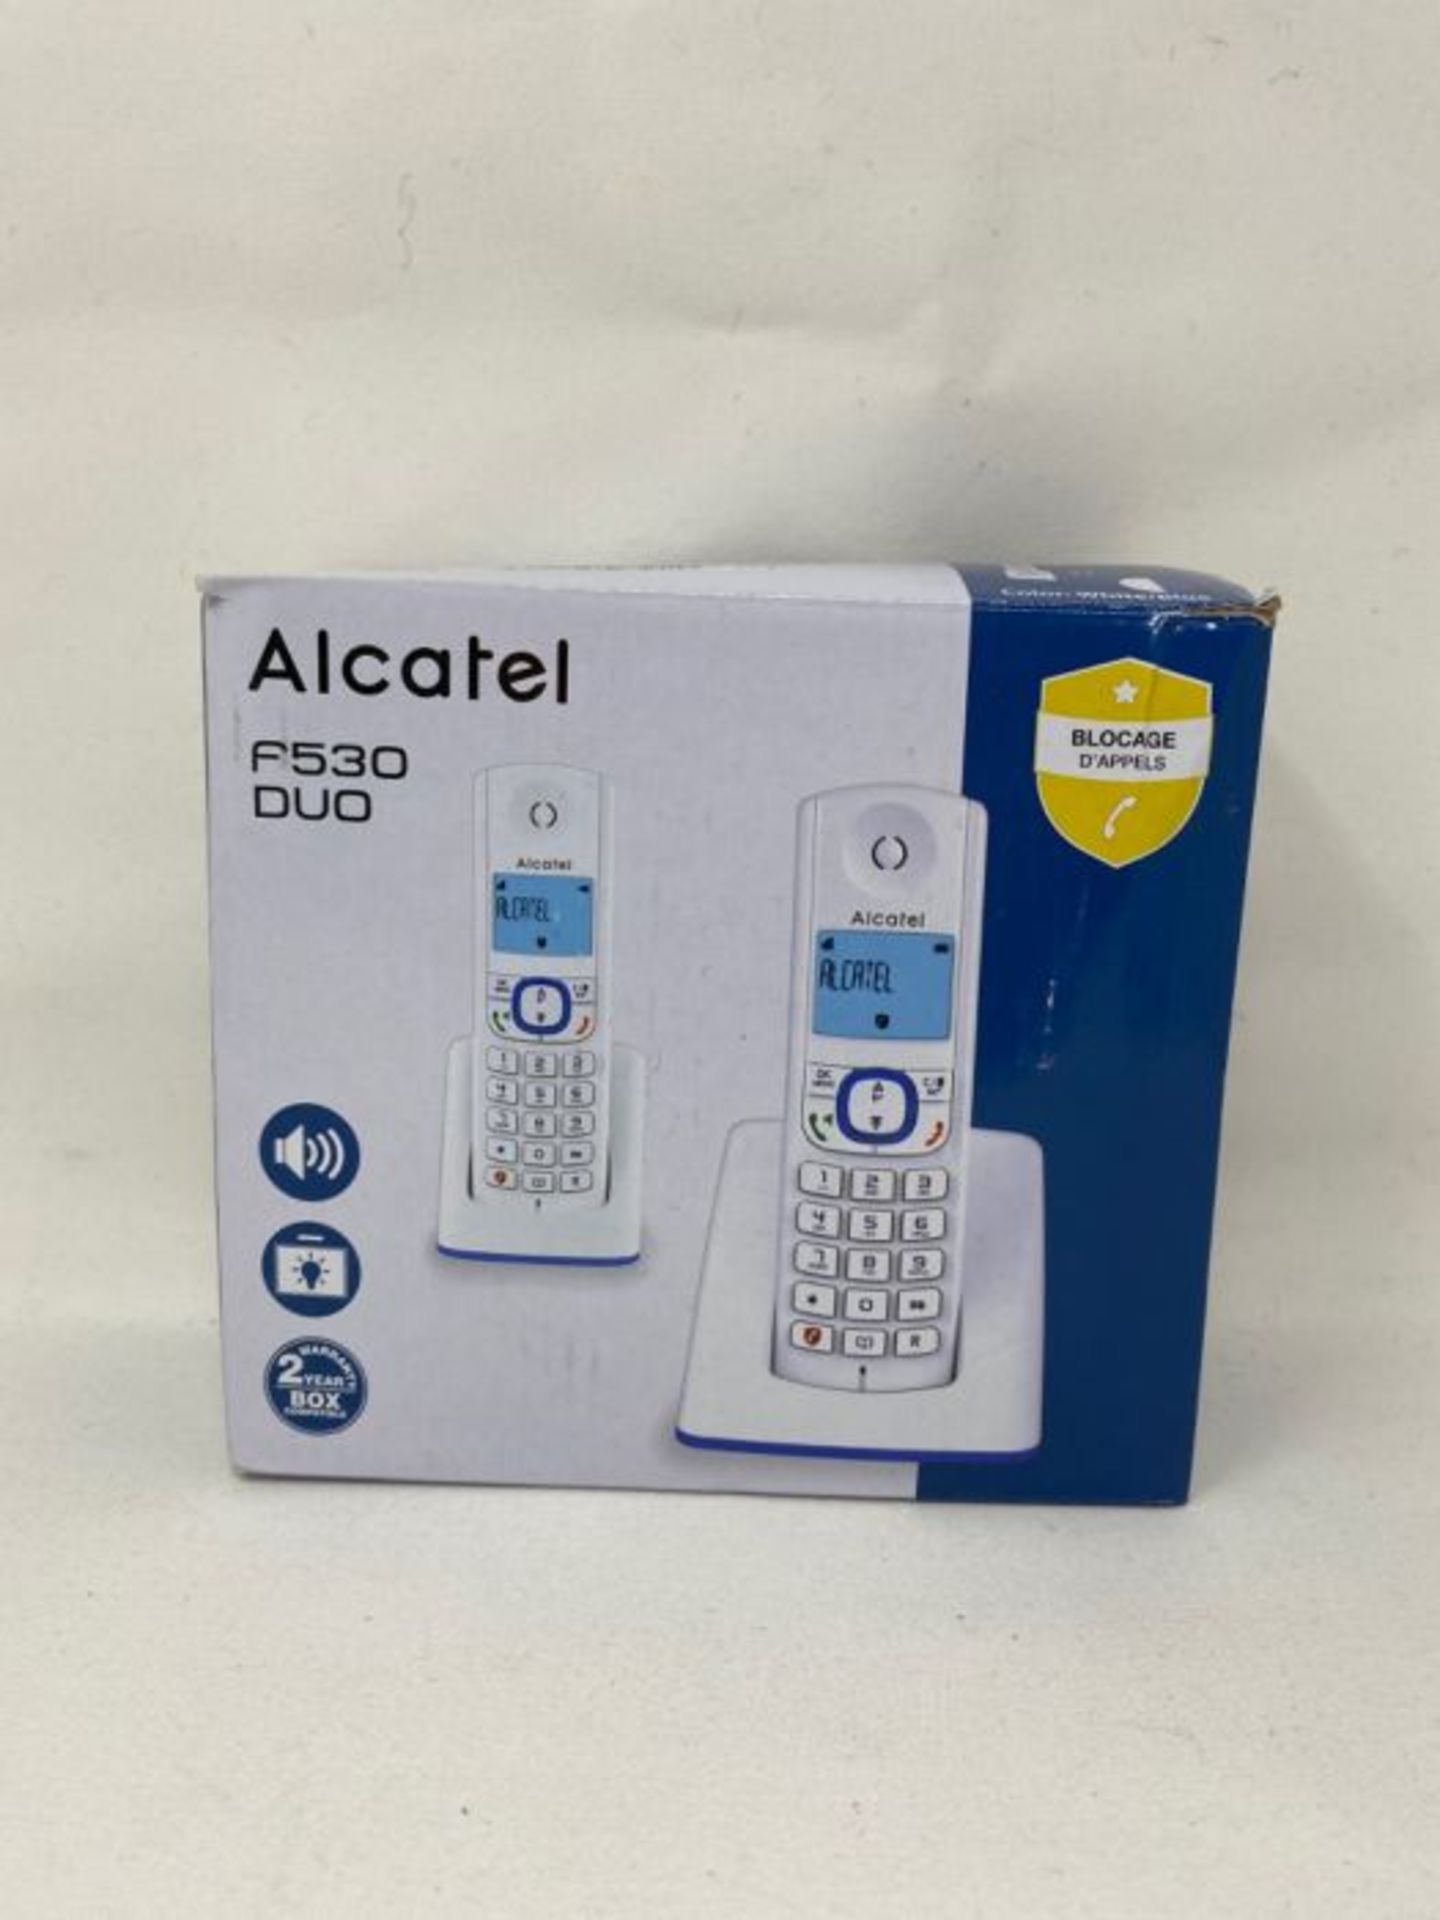 RRP £55.00 Alcatel F530 Duo Candy-Bar - Image 2 of 3